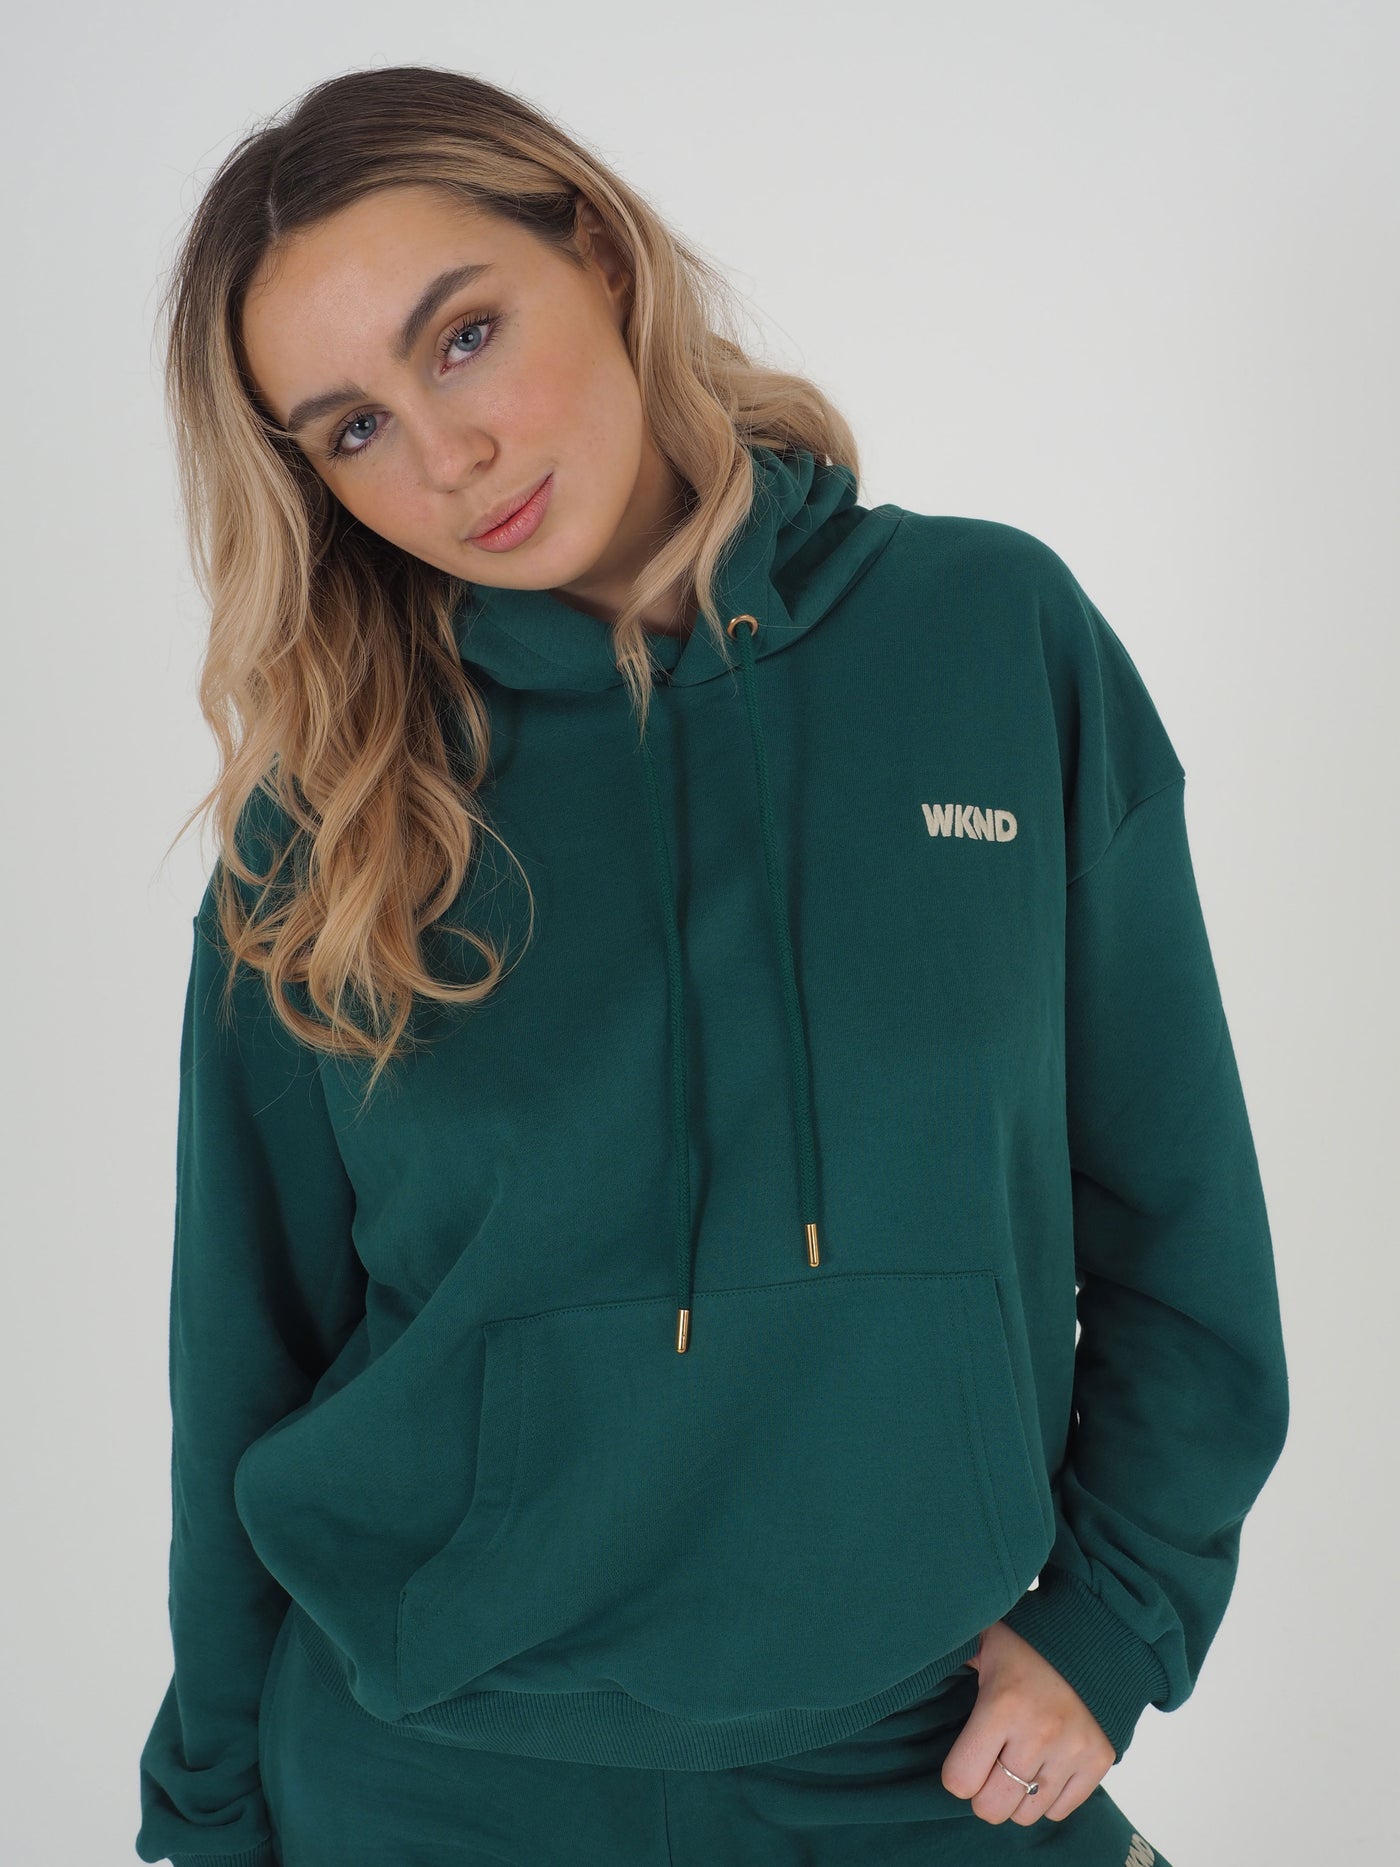 Model with blonde hair is wearing a green hoodie. WKND Embroidery to the chest.